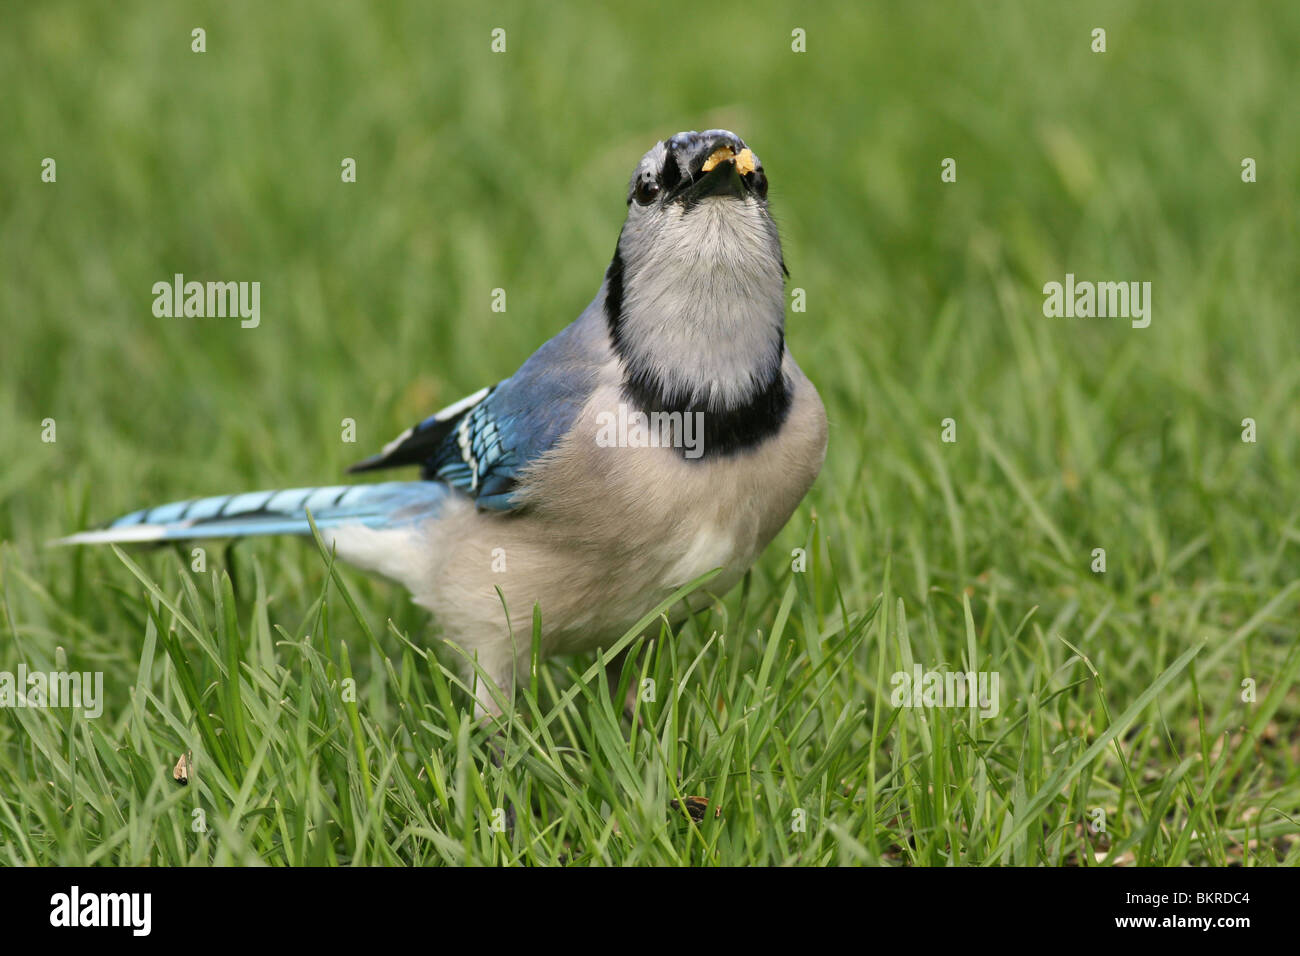 Blue jay eating seed Stock Photo